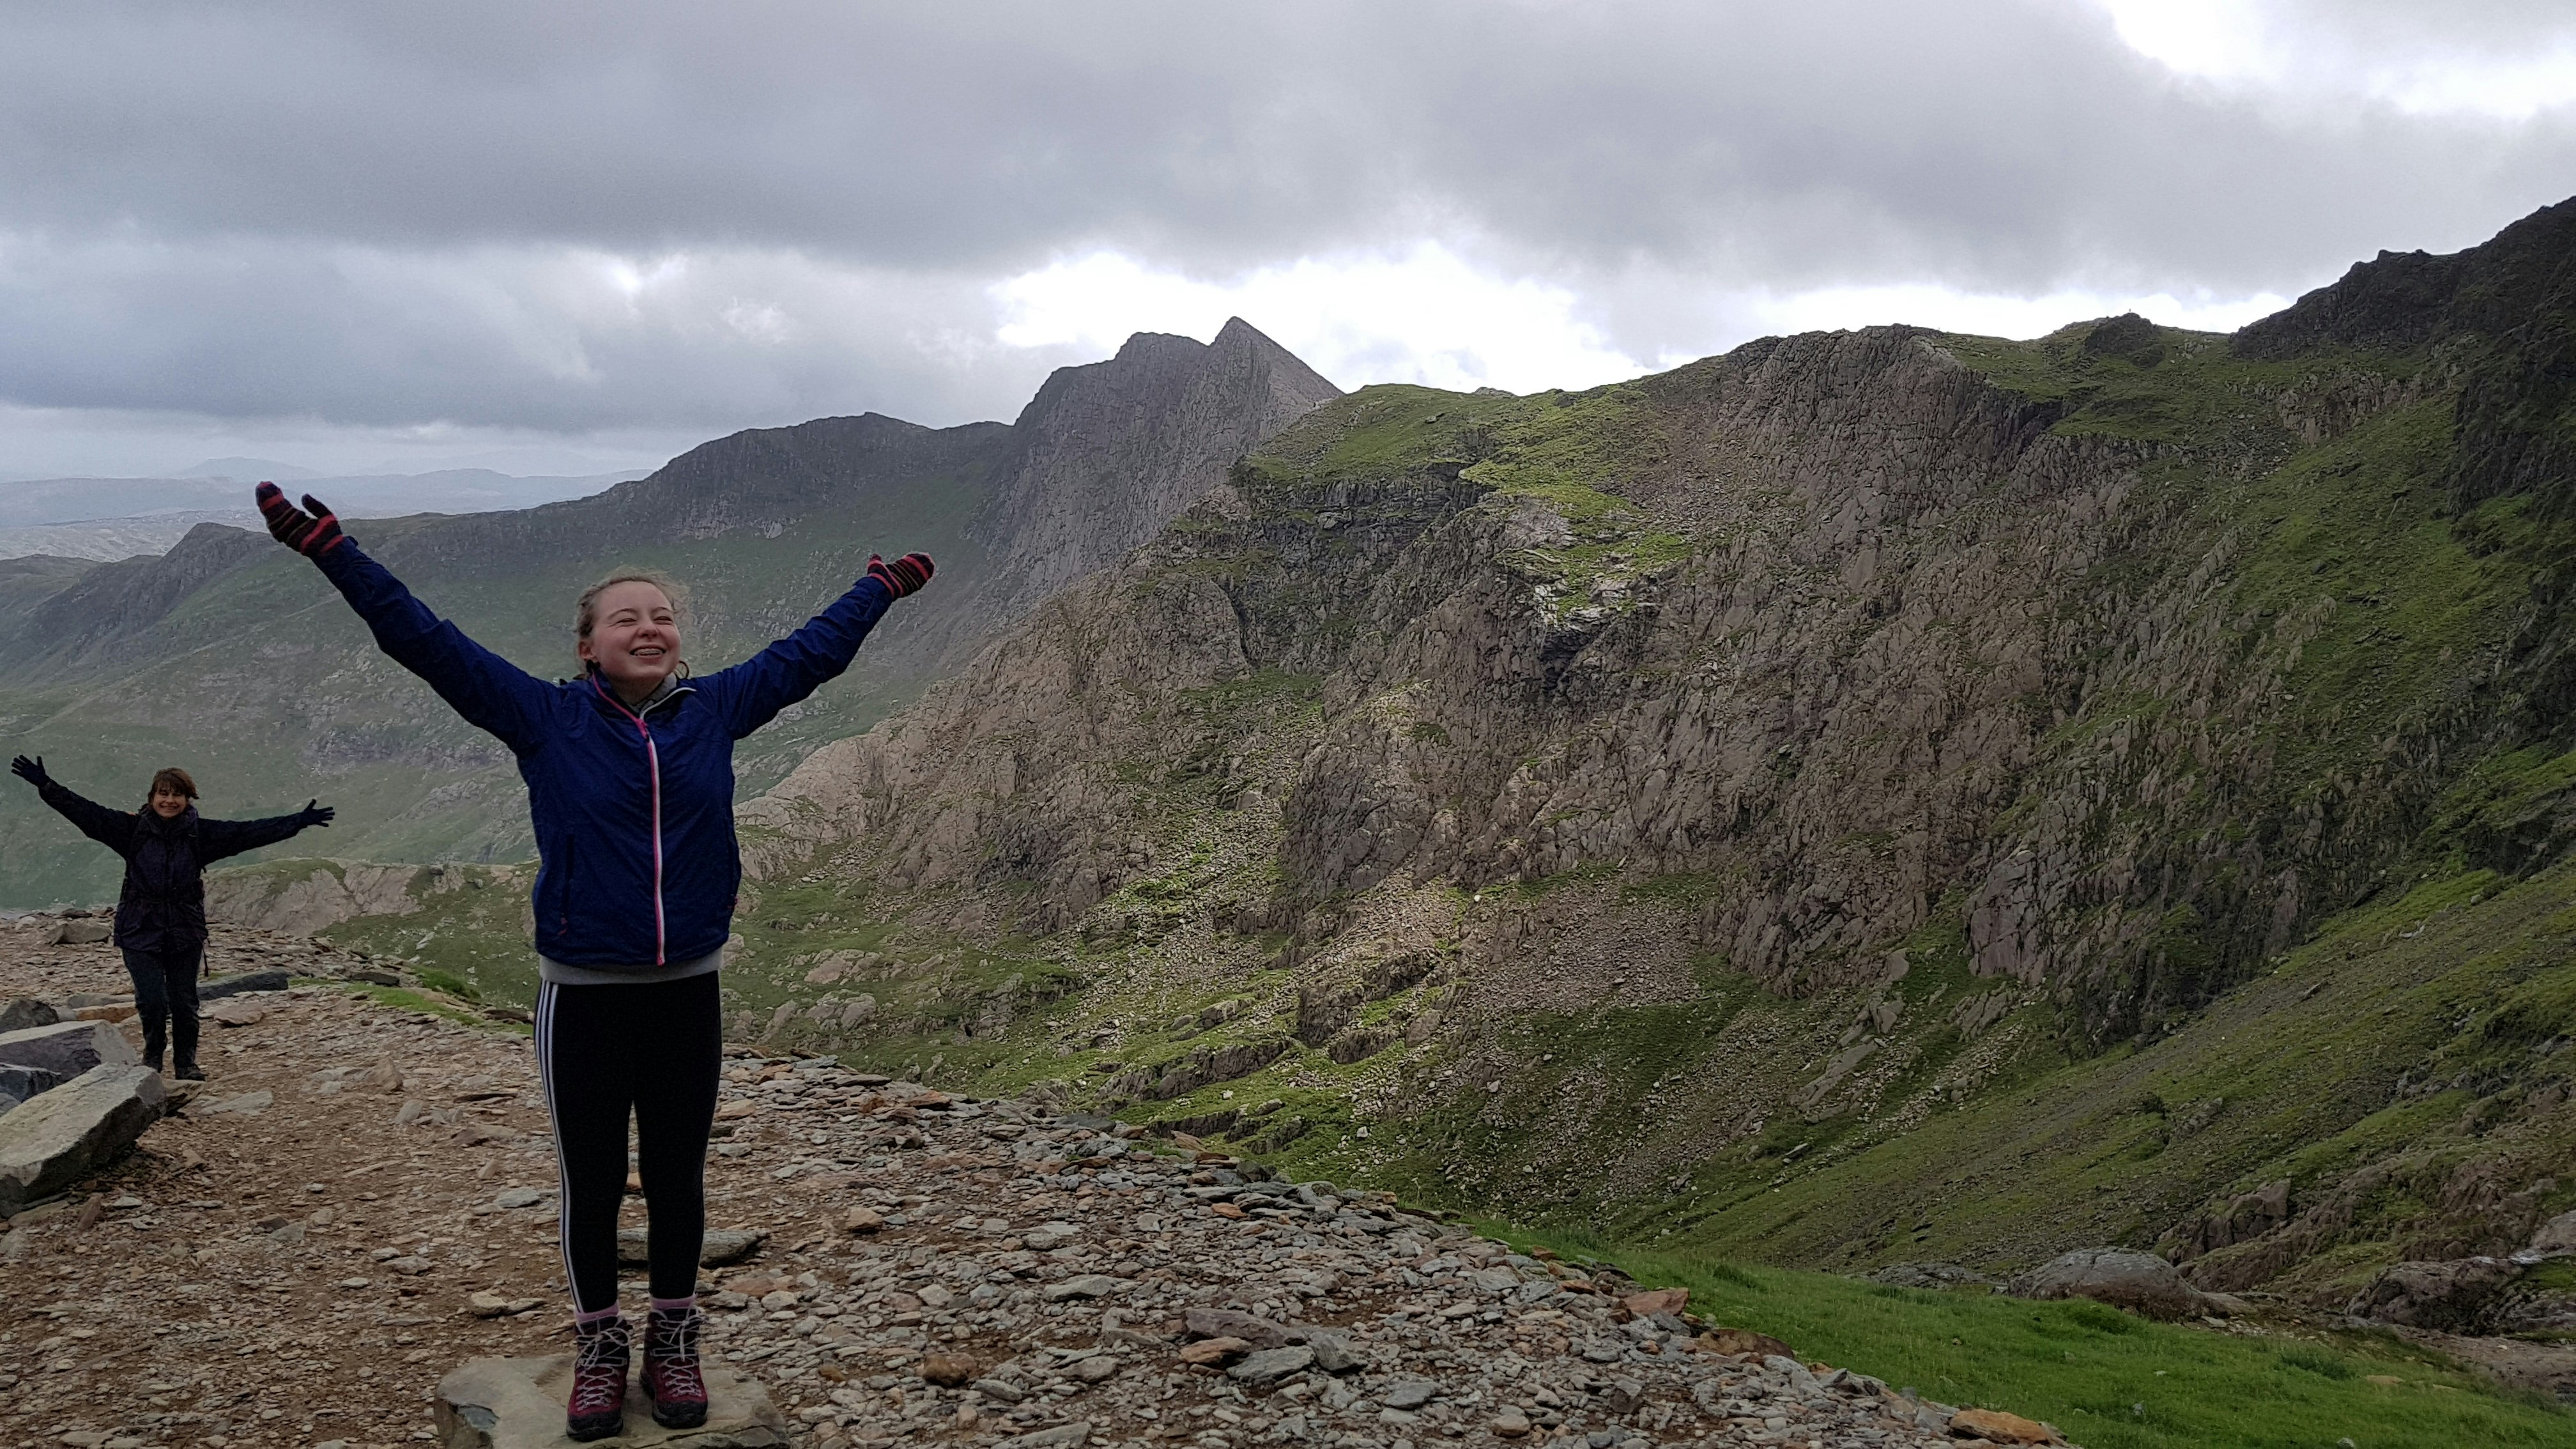 Tweens raise theri arms in enthusiasm at the top of Snowdon peak, the highest mountain in wales. Behind them, jagged sawtooth rock formations are coated in green moss against a grey cloudy sky..jpg